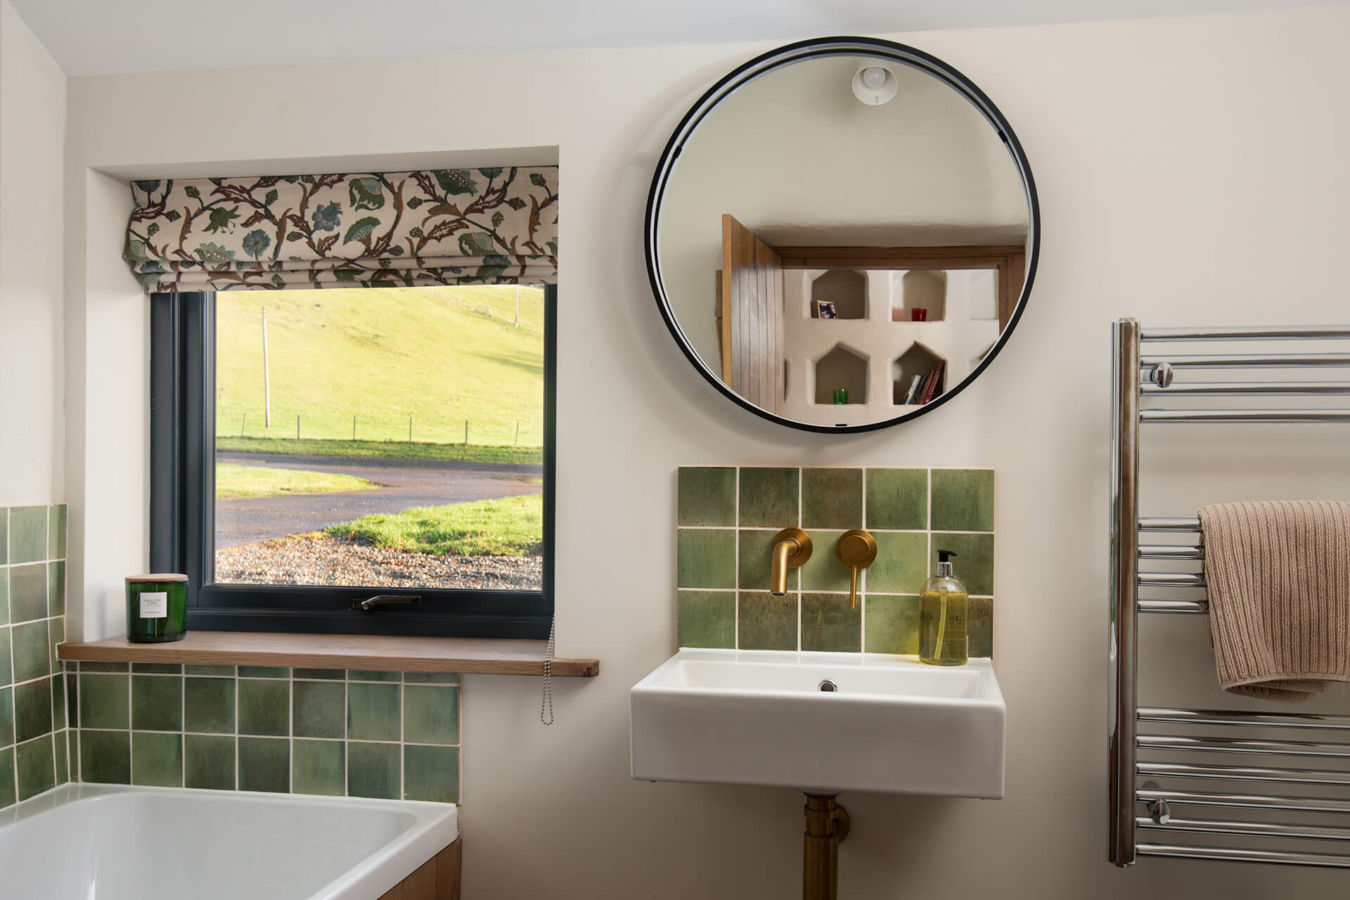 Bathroom in The Dovecot at Reedsford with green tiles large round mirror with view back over the nesting boxes and window looking out over the river